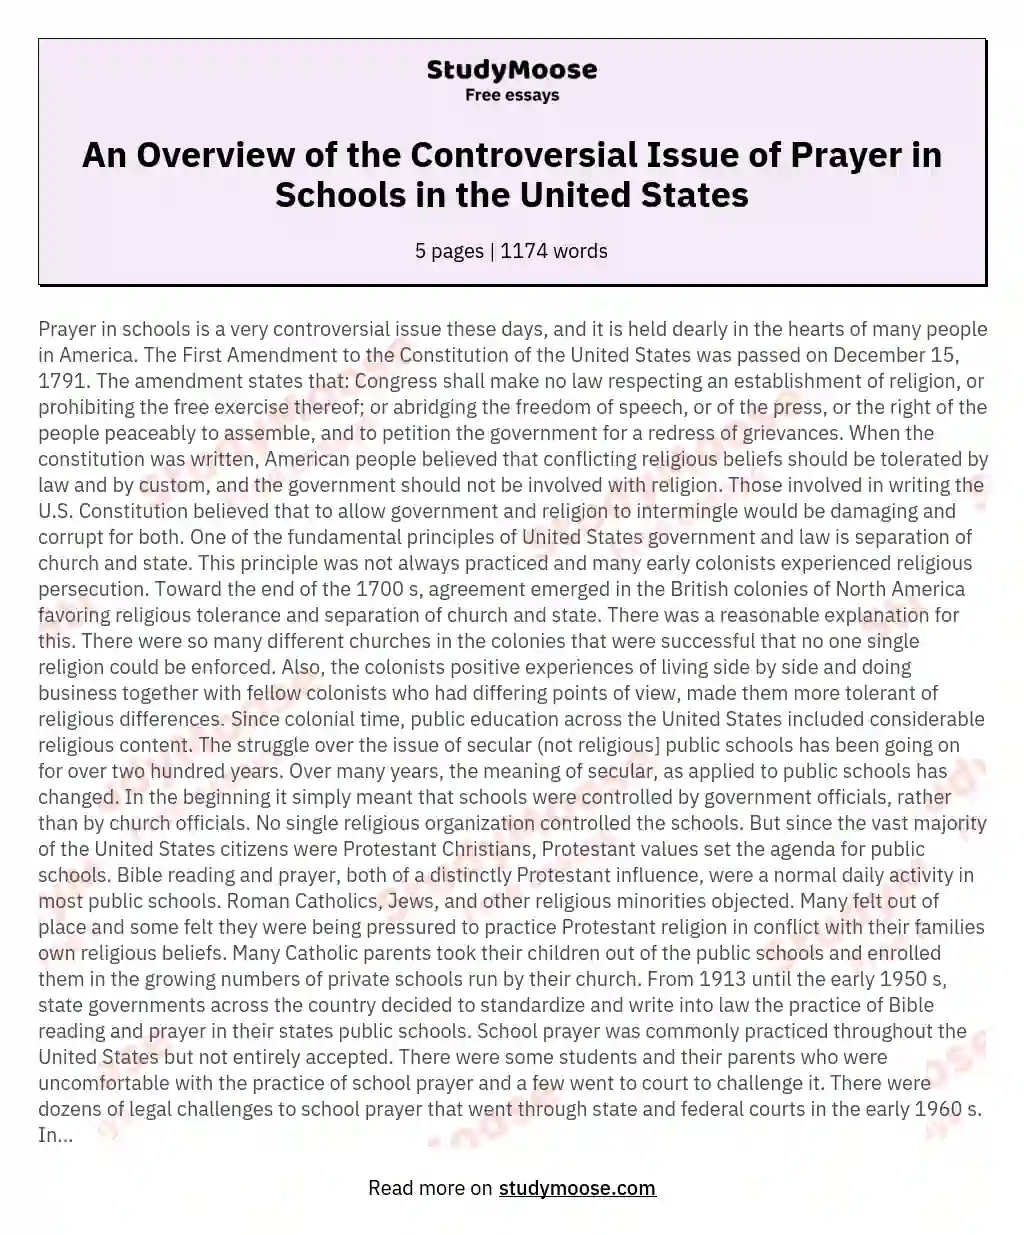 An Overview of the Controversial Issue of Prayer in Schools in the United States essay